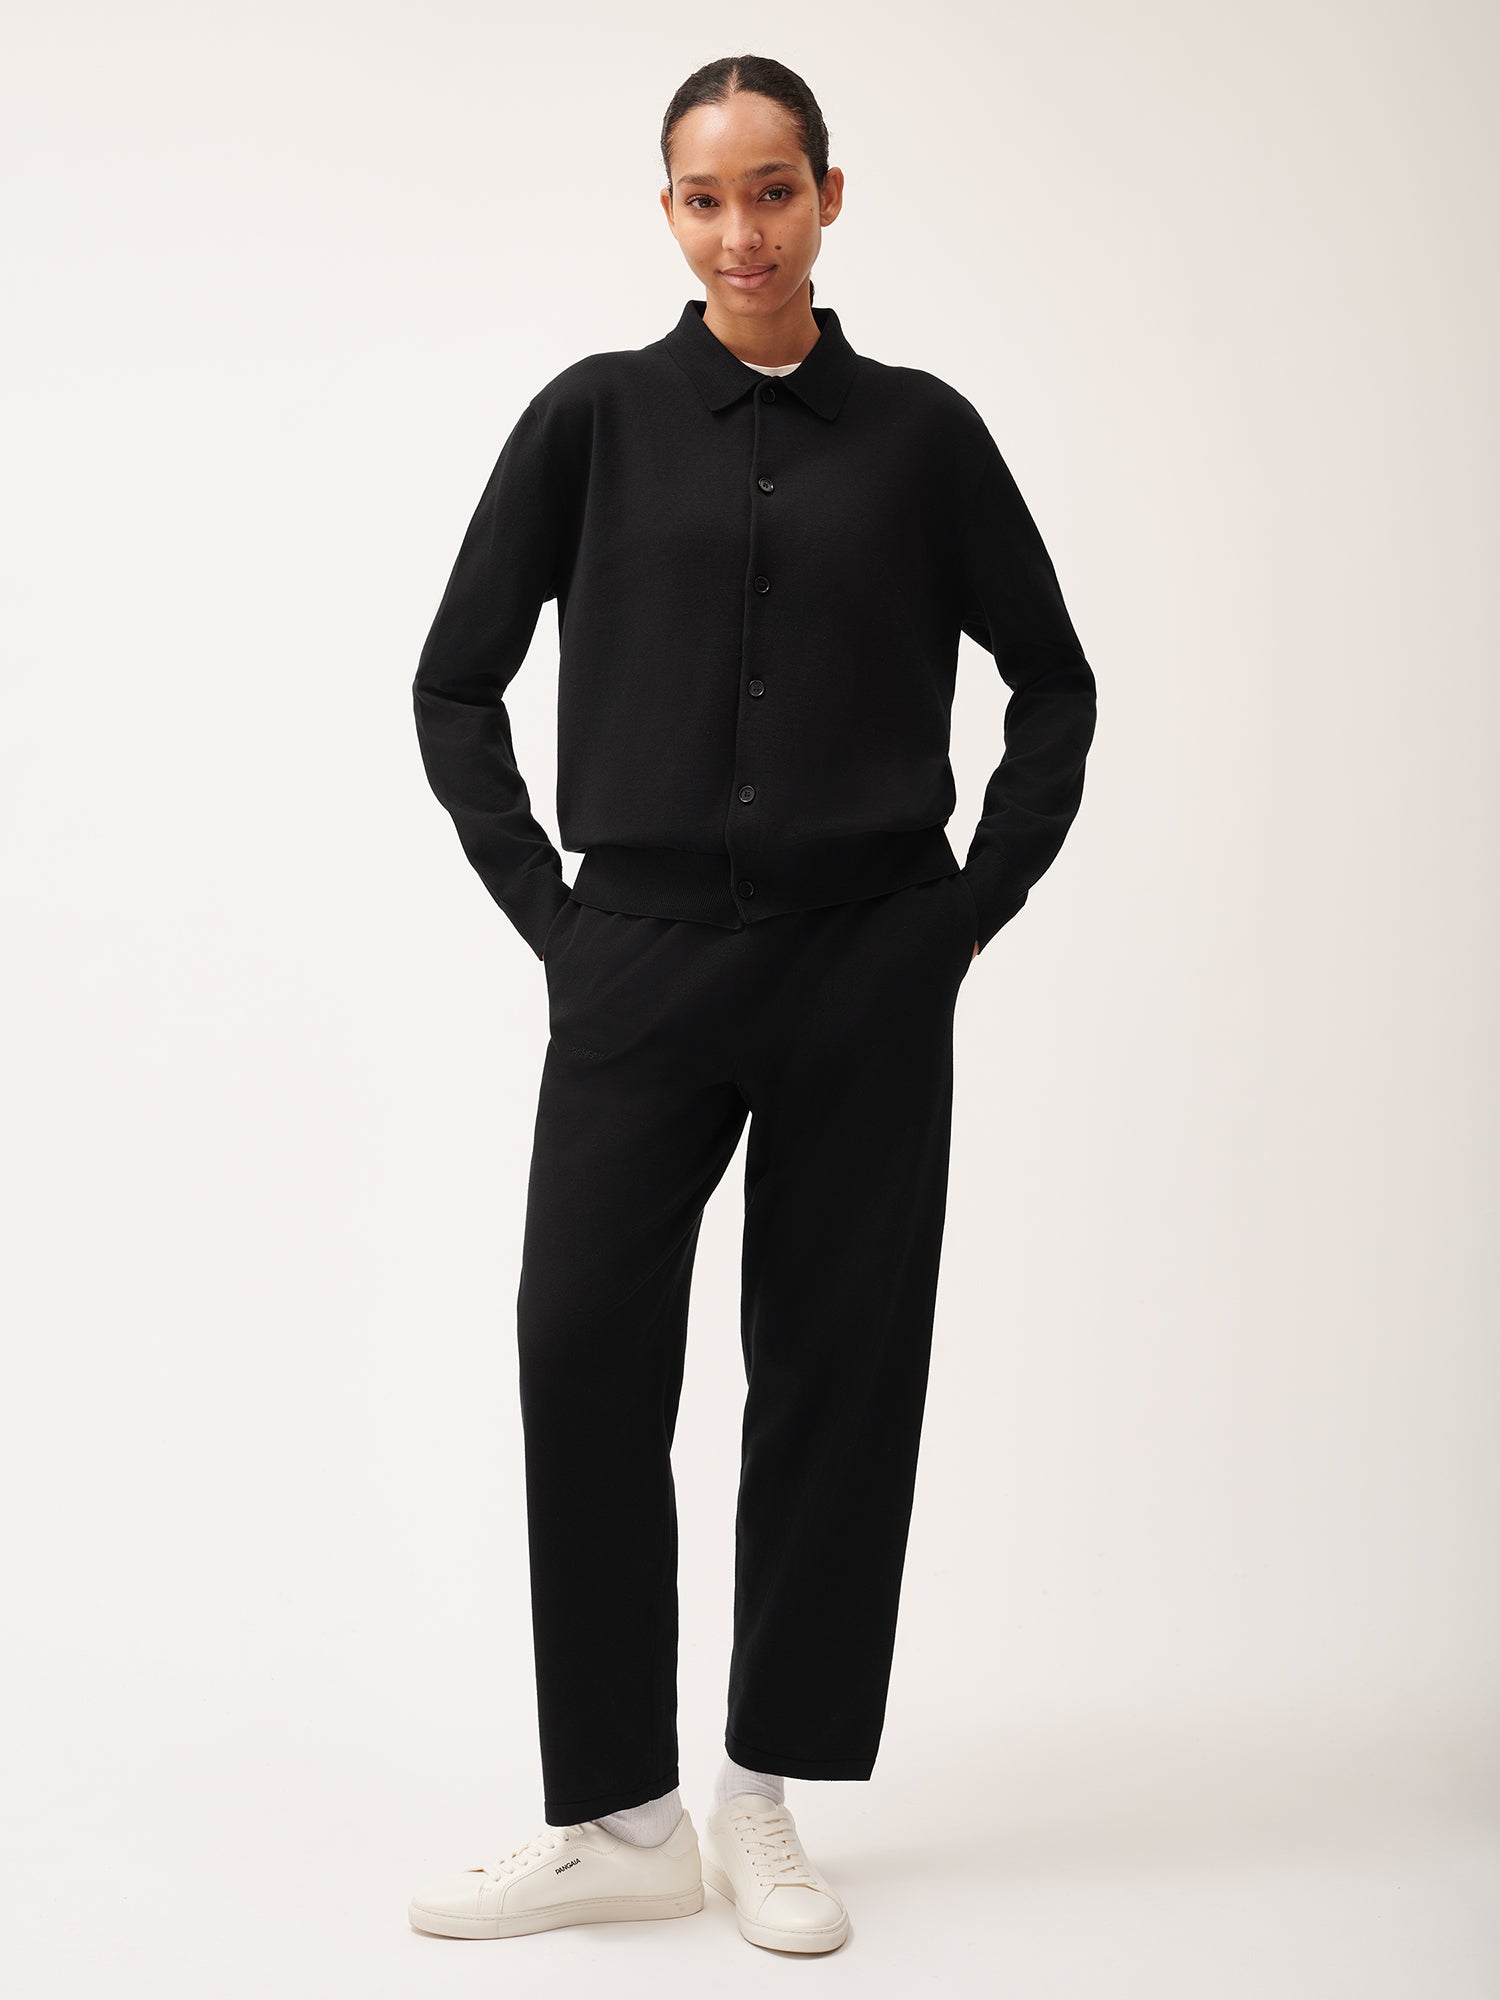 DNA_Knitted_Collared_Shirt_Black_female-1